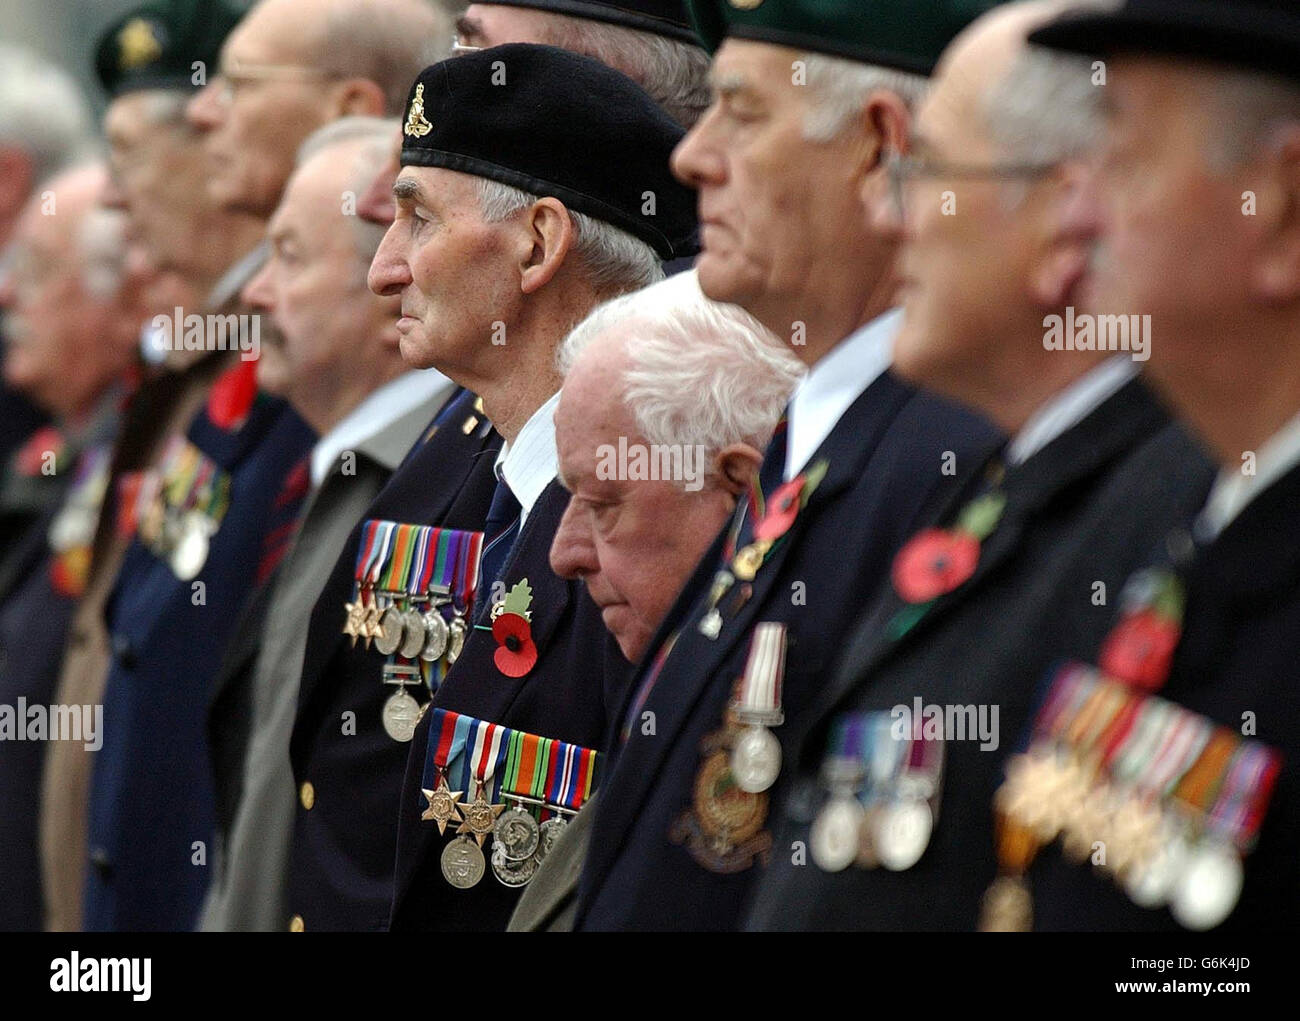 Remembering fallen comrades, ex servicemen from the British Army attend a Remembrance Service at the York War Memorial, where two-minutes silence was observed at 11am, in honour of the UK's war dead. The Australian War Memorial was unveiled at a ceremony in London's Hyde Park. Stock Photo